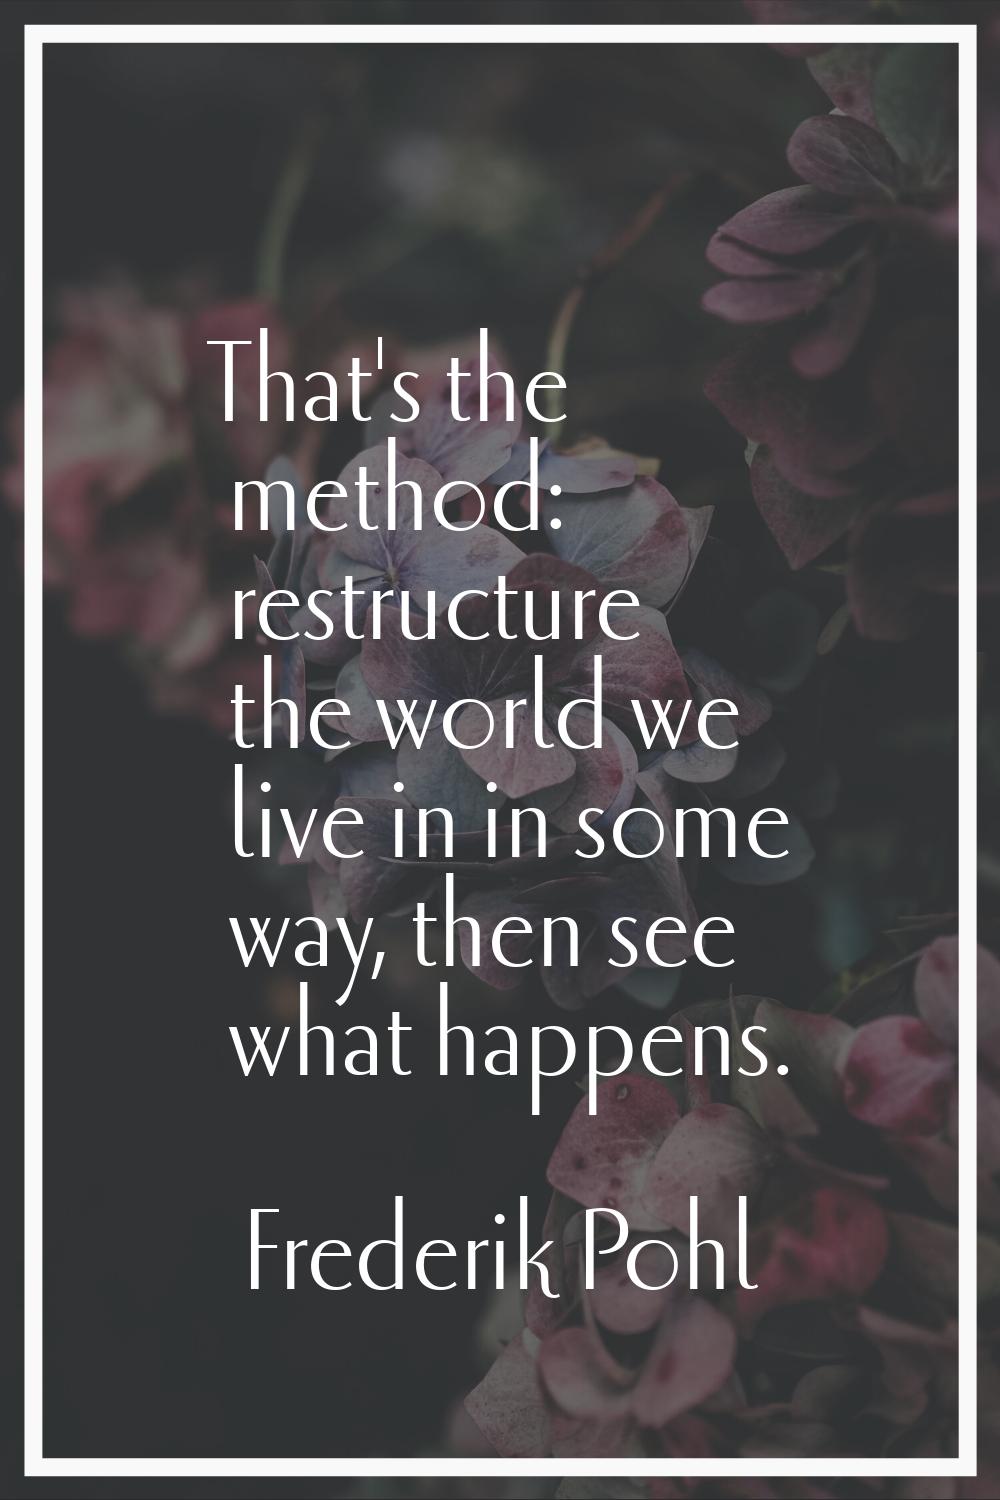 That's the method: restructure the world we live in in some way, then see what happens.